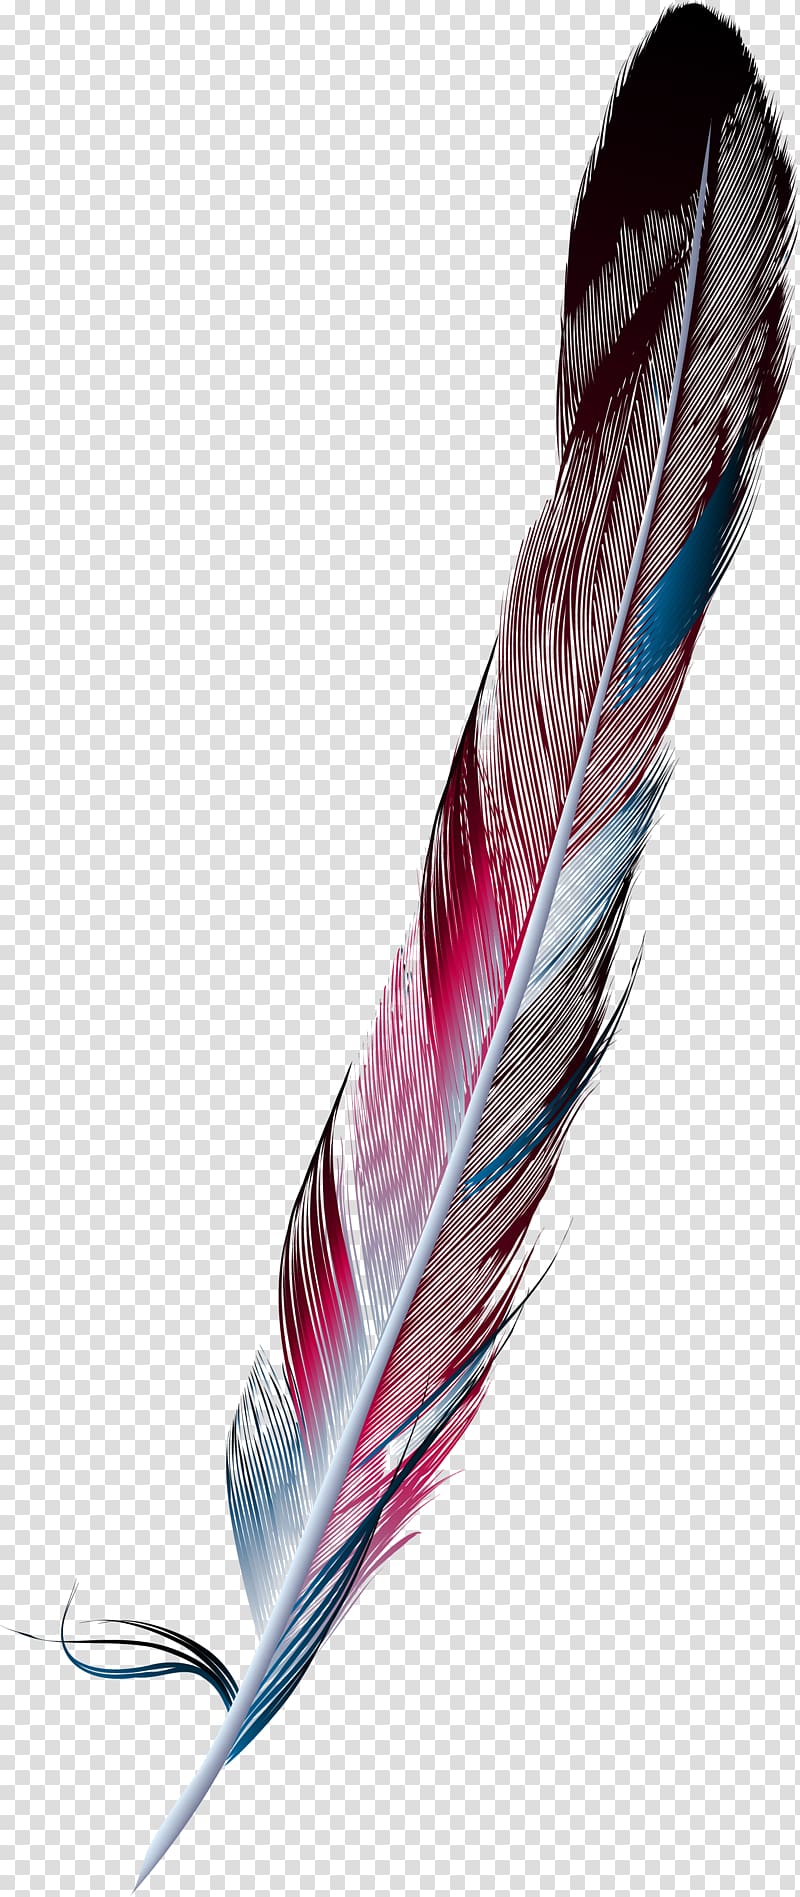 Premium Photo | A colorful feather painting with the word feathers on it